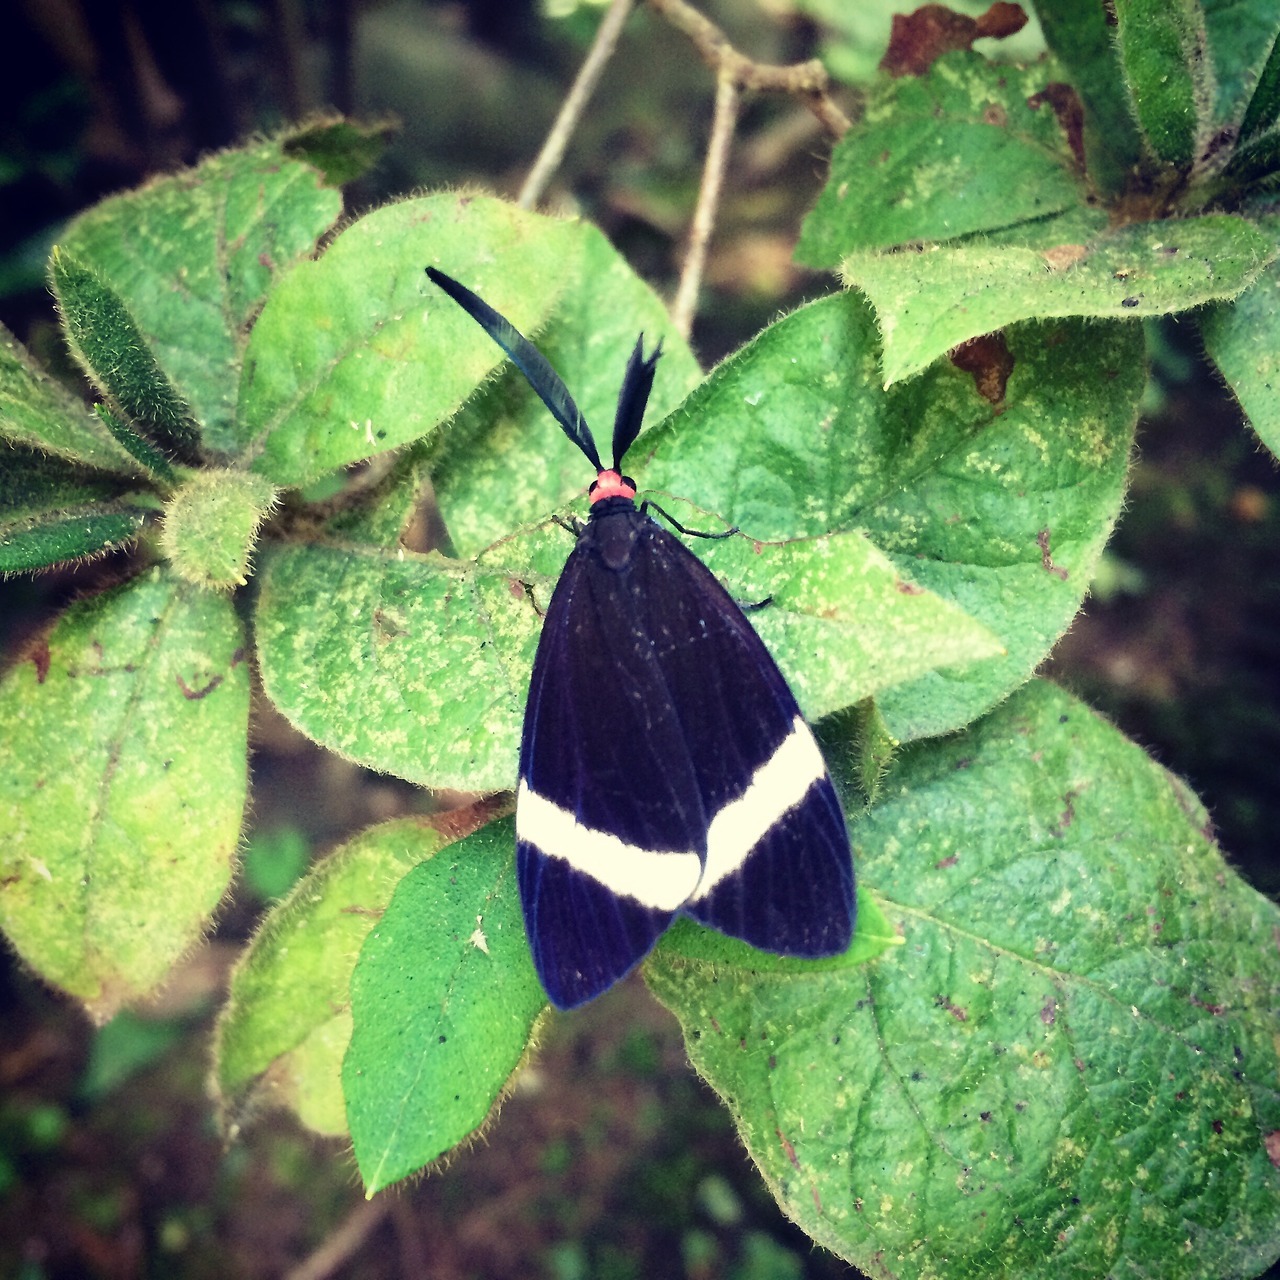 ““Hi. Perhaps it’s common but I’m here for just three weeks. Saw it yesterday in Kyoto.
Best,
D” ”
Thanks very much for your photo submission. I was happy to receive such a clean photo of your moth, which is a common and handsome “Hotaru-Ga”, which...